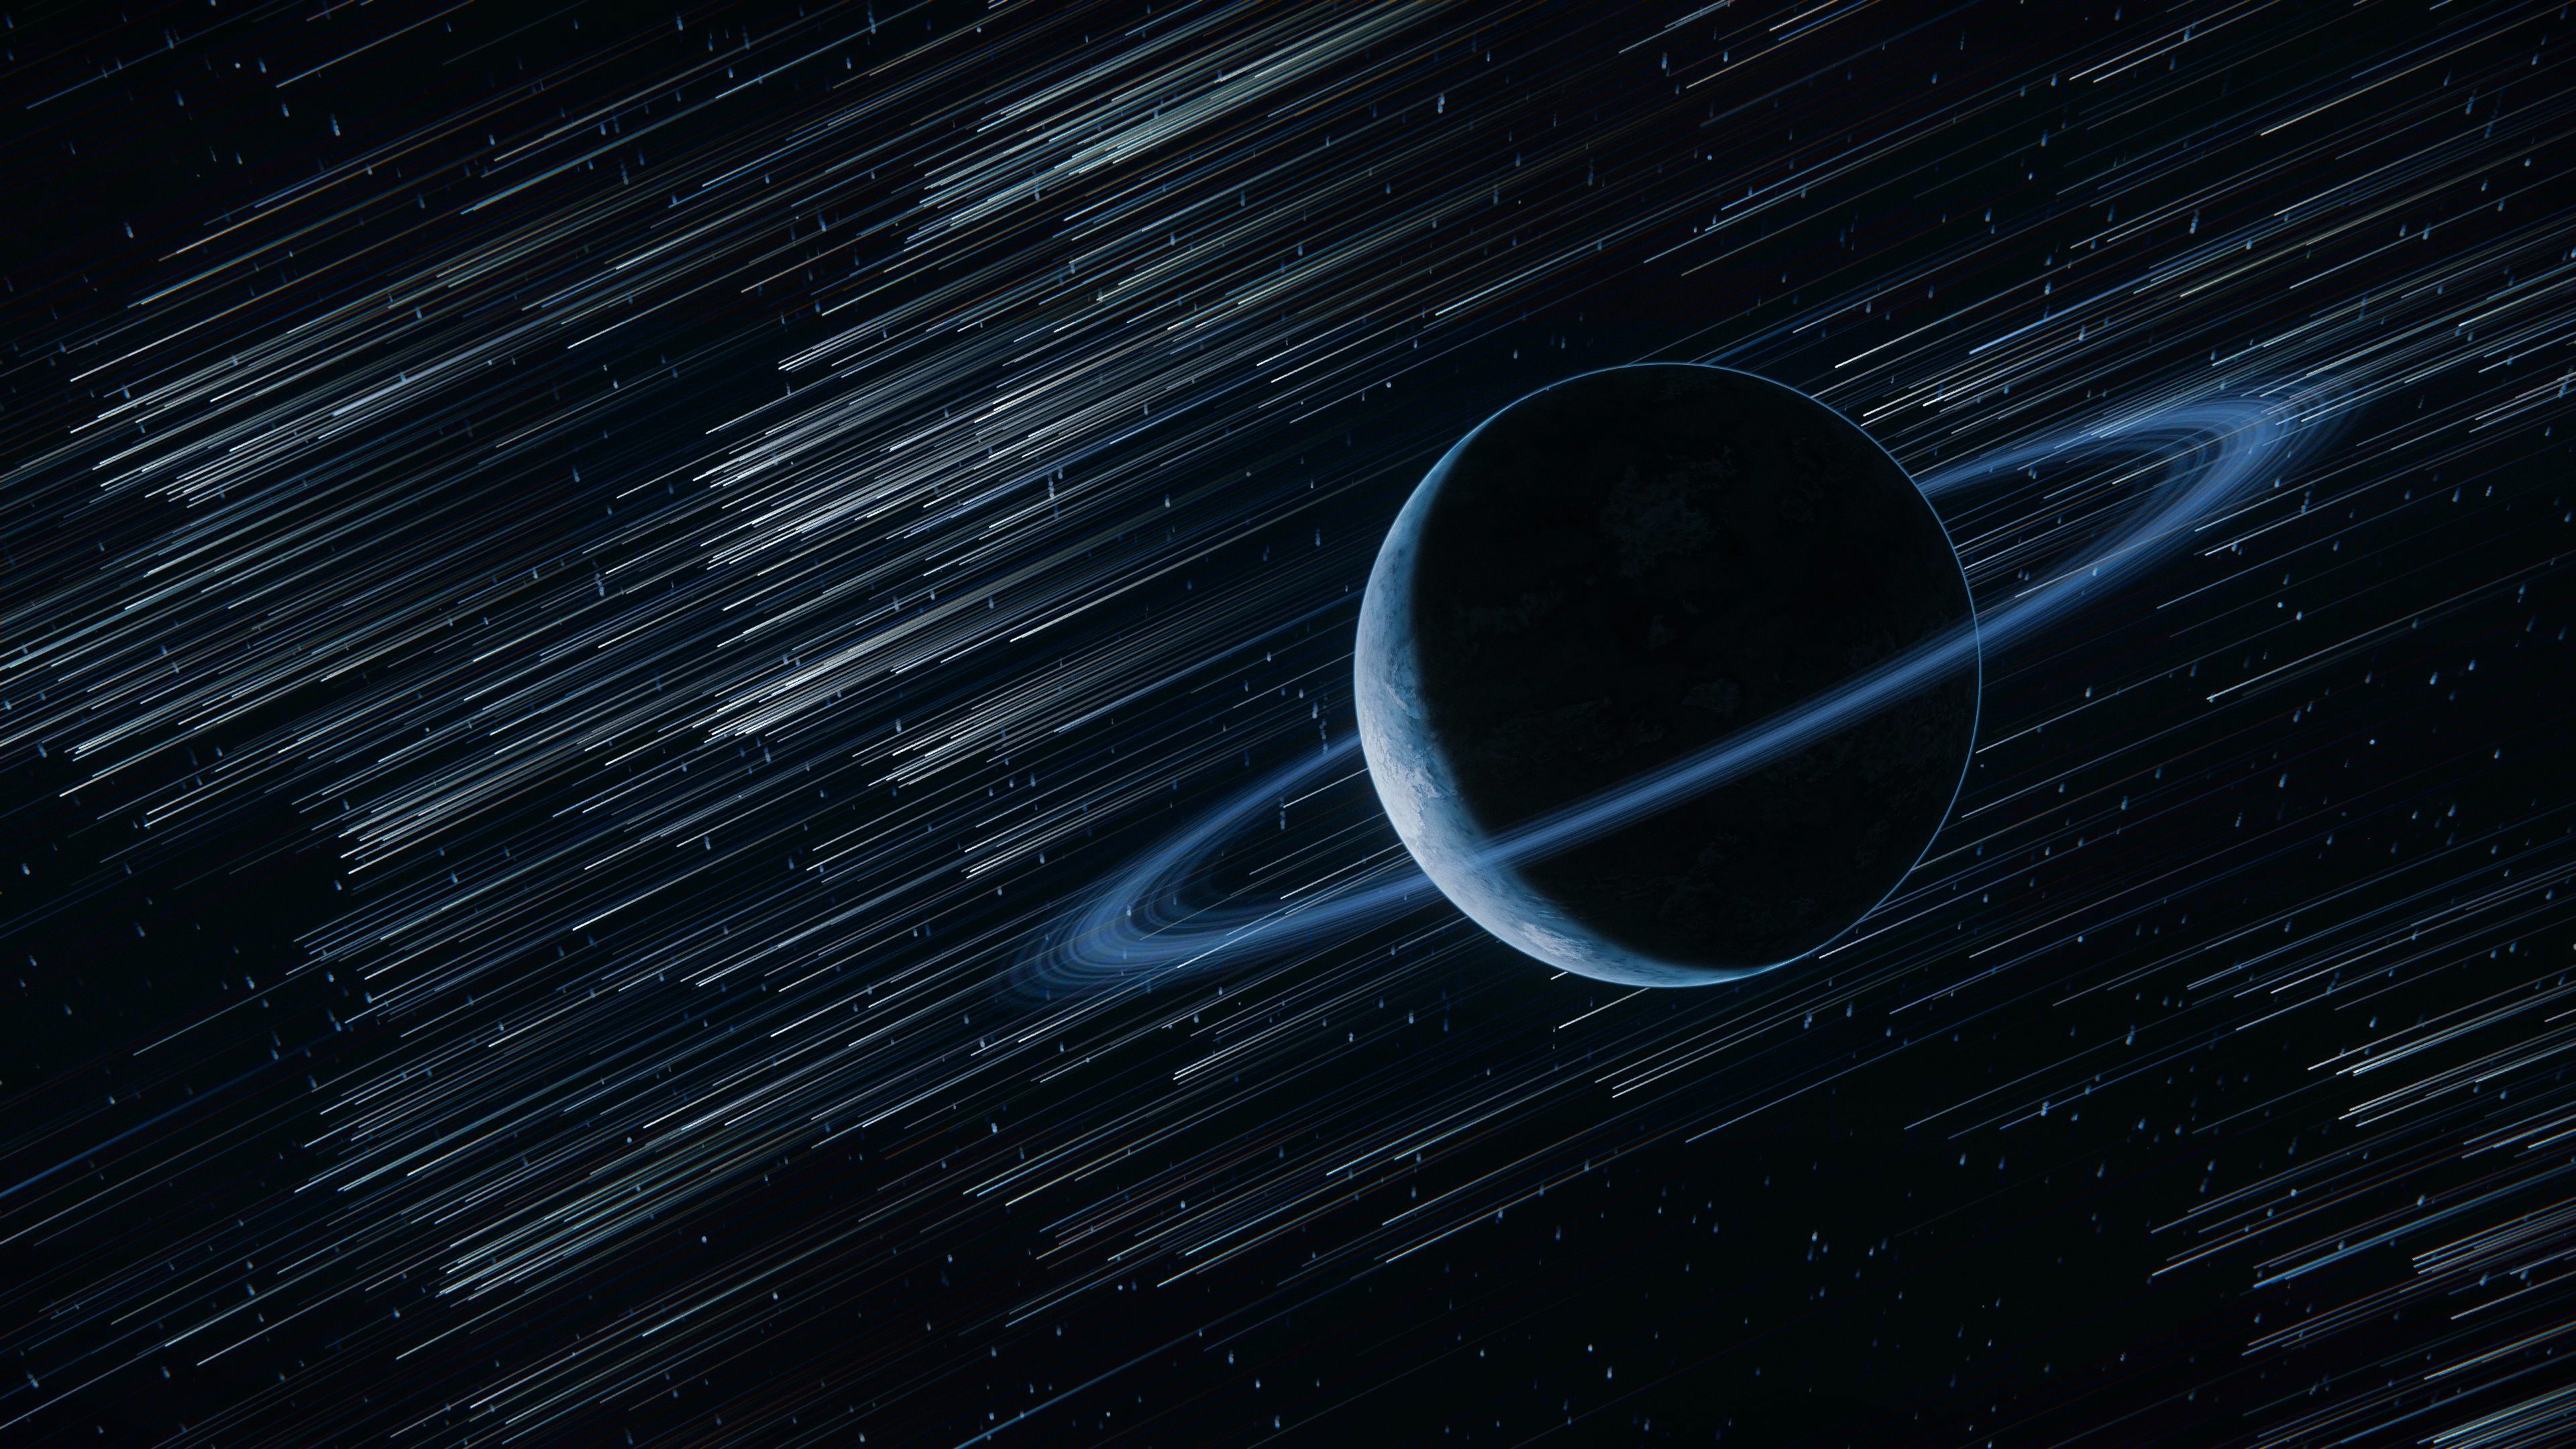 Saturn 4k, HD Digital Universe, 4k Wallpaper, Image, Background, Photo and Picture